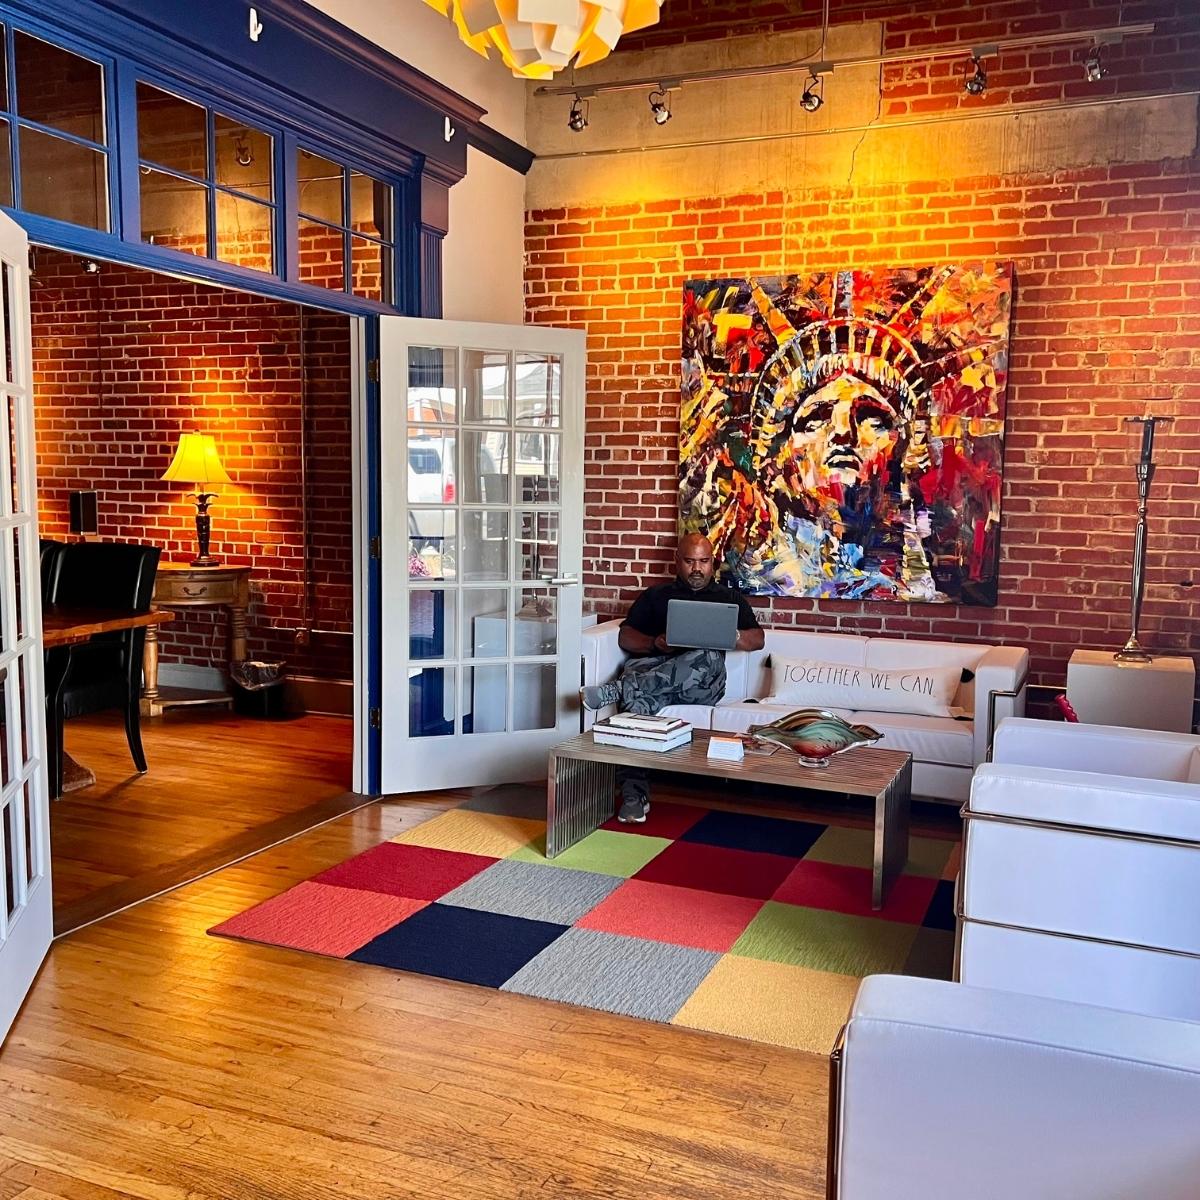 A living room with a vibrant rug and rustic brick walls.